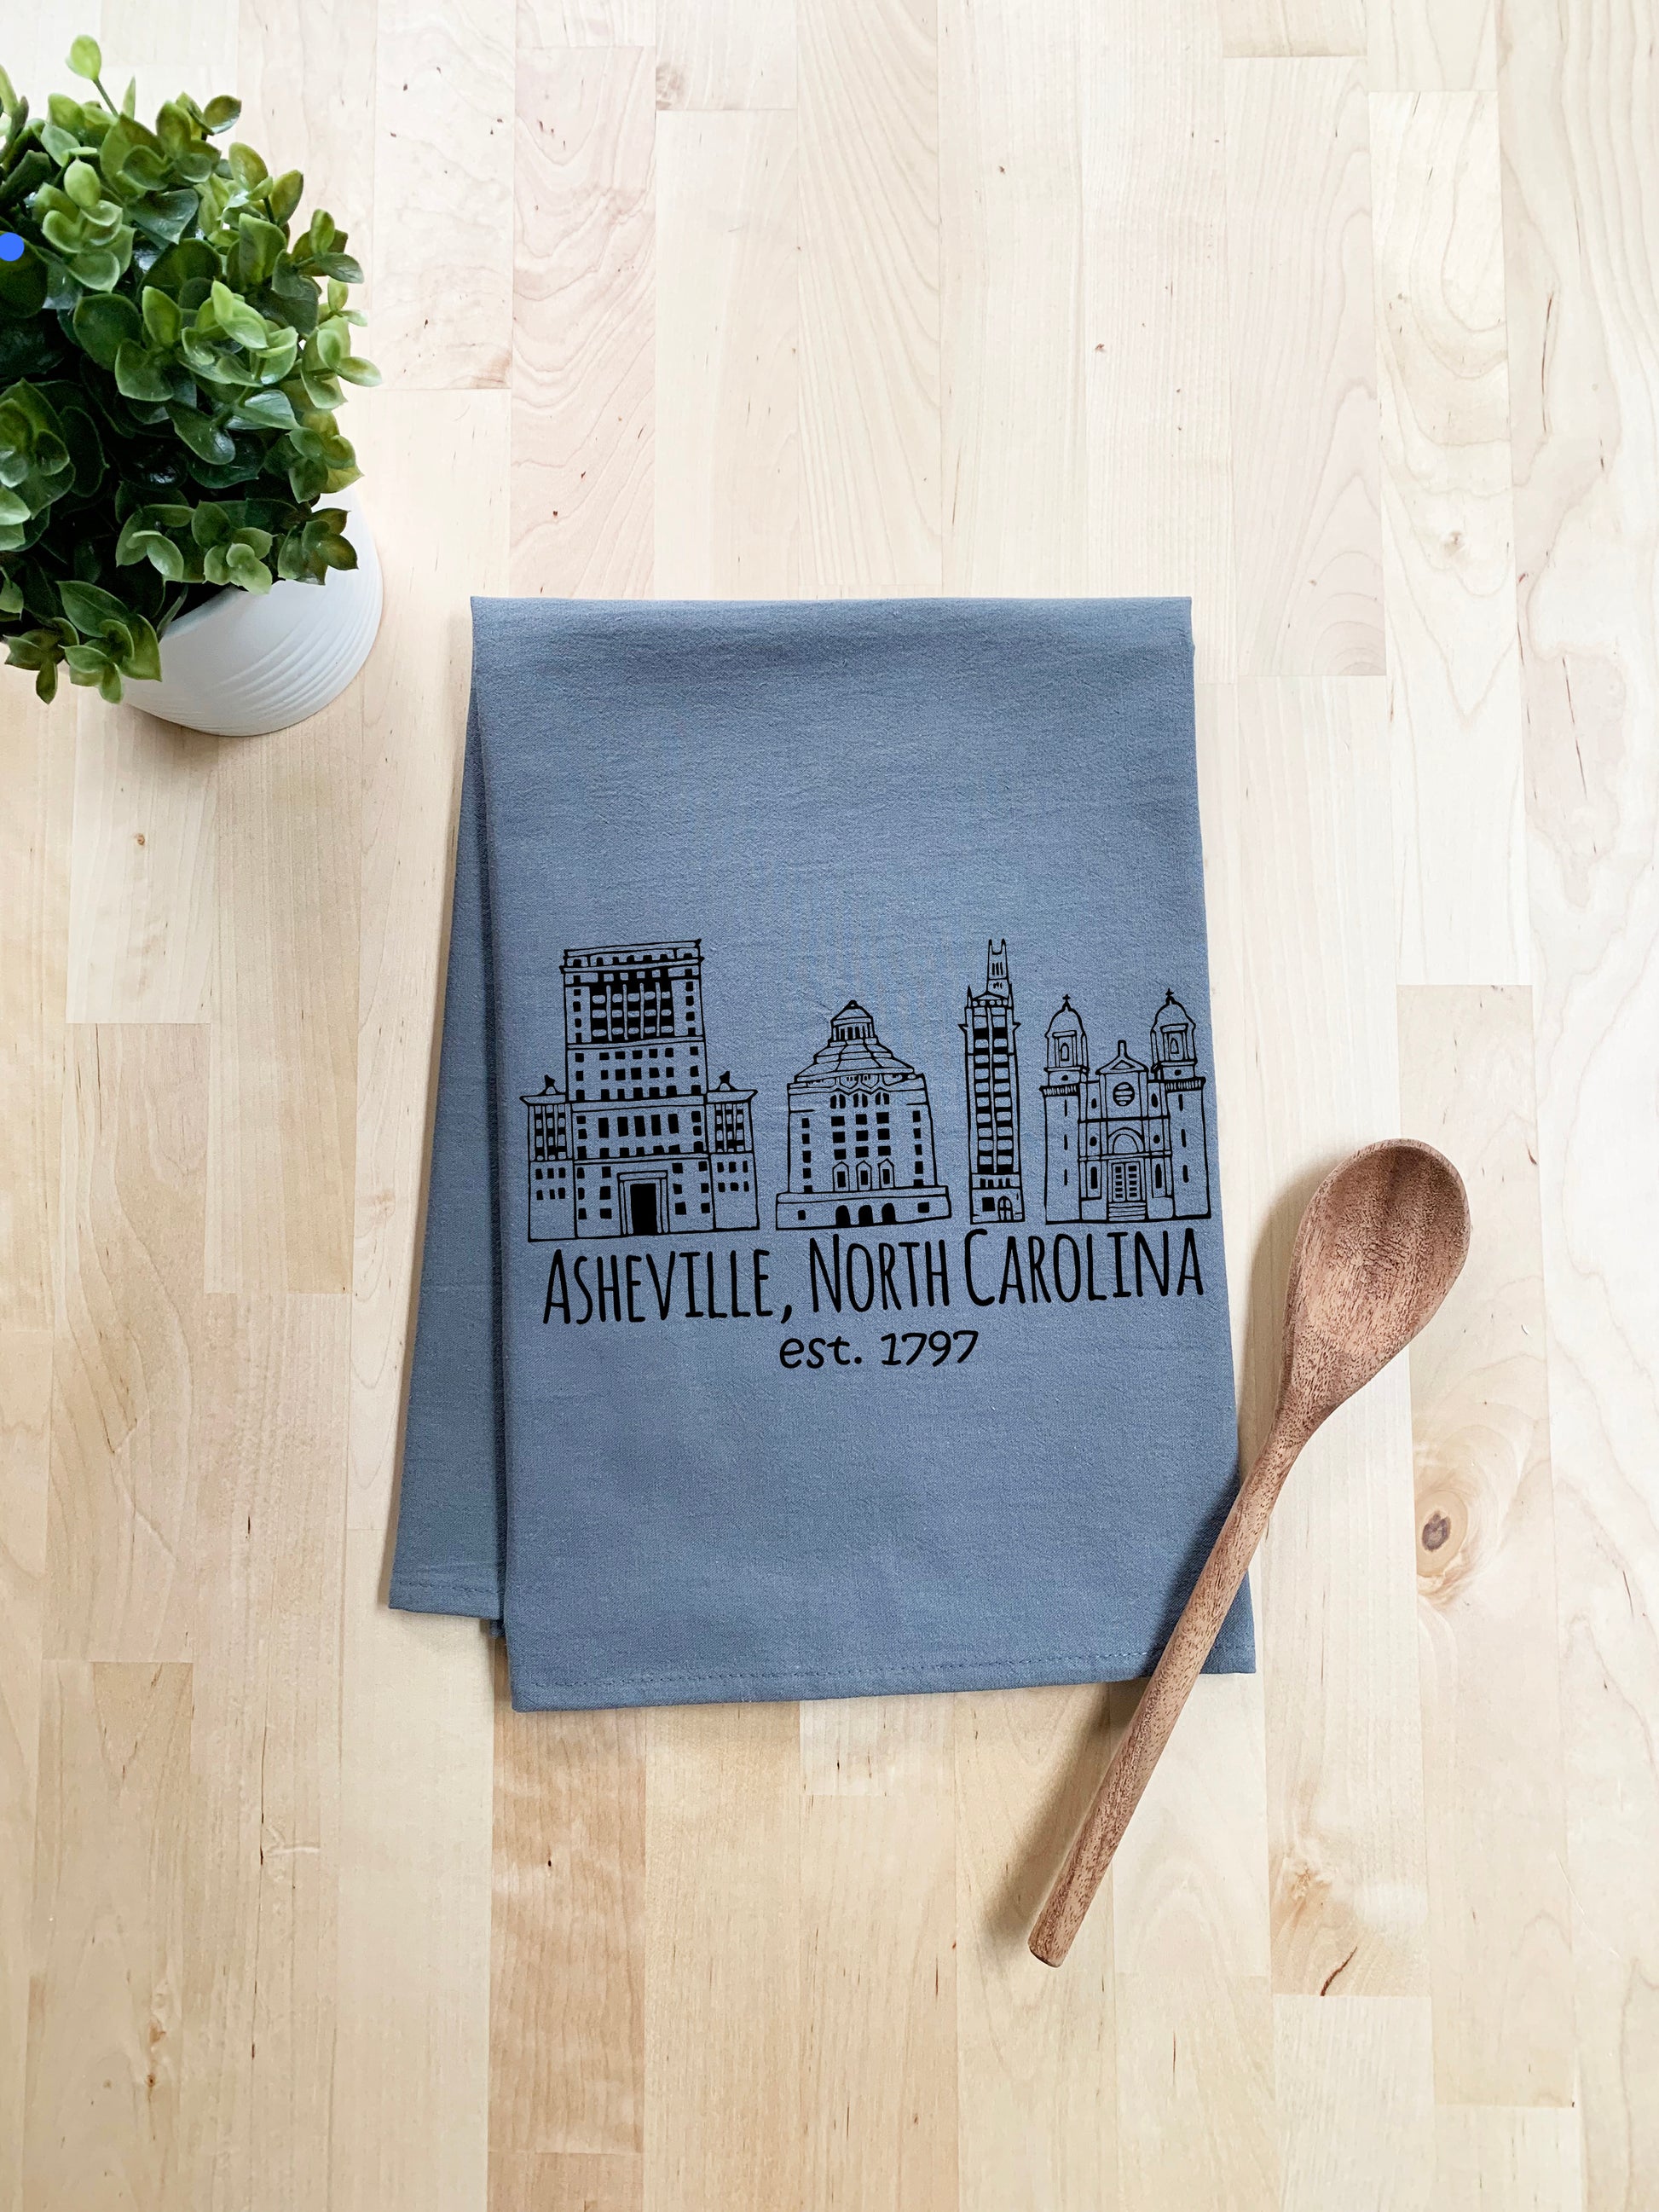 Downtown Historic Asheville, North Carolina Dish Towel - White Or Gray - MoonlightMakers